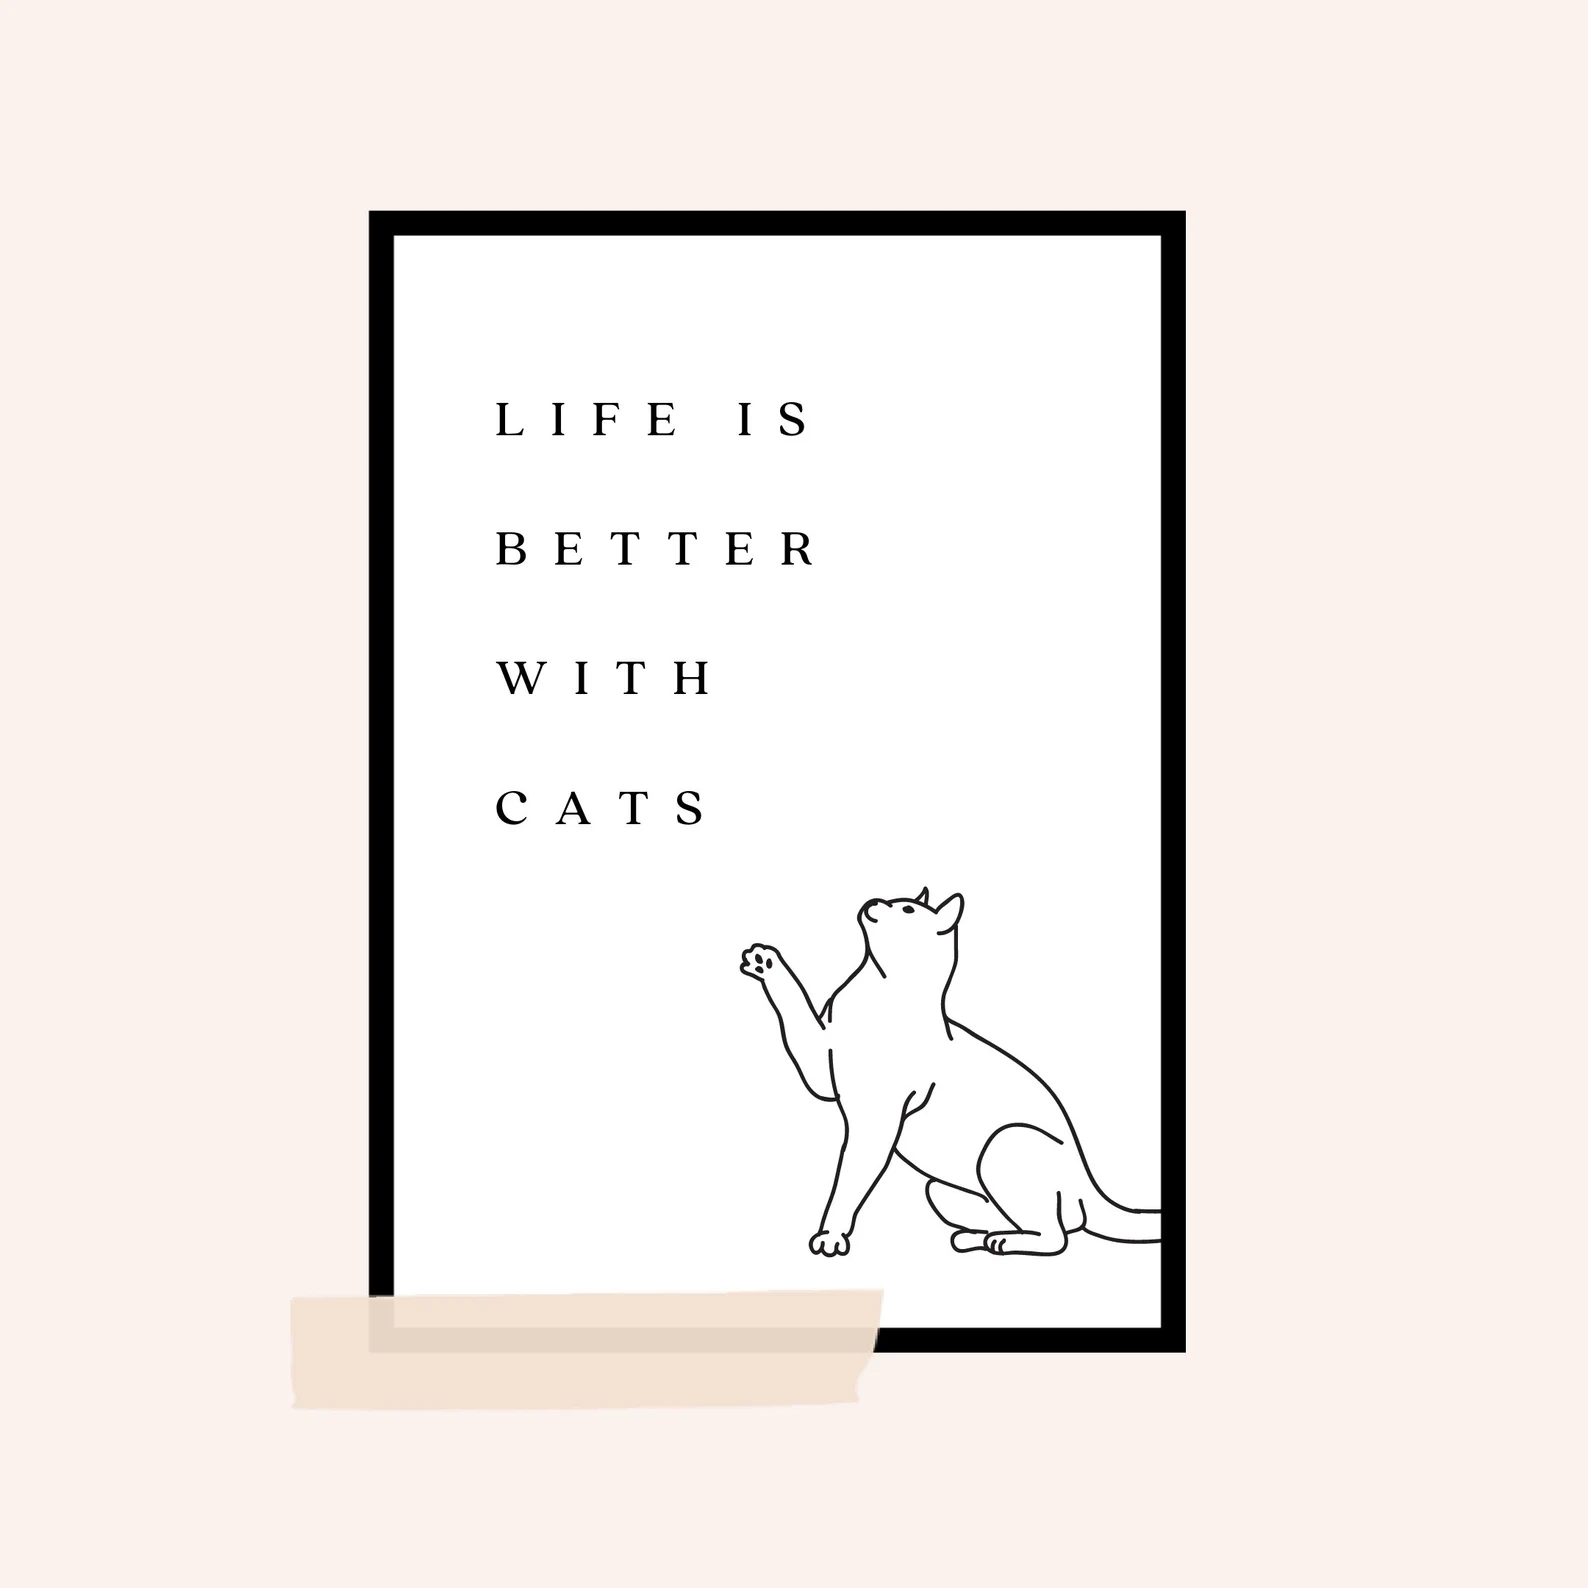 Life is better with cats wall art quote